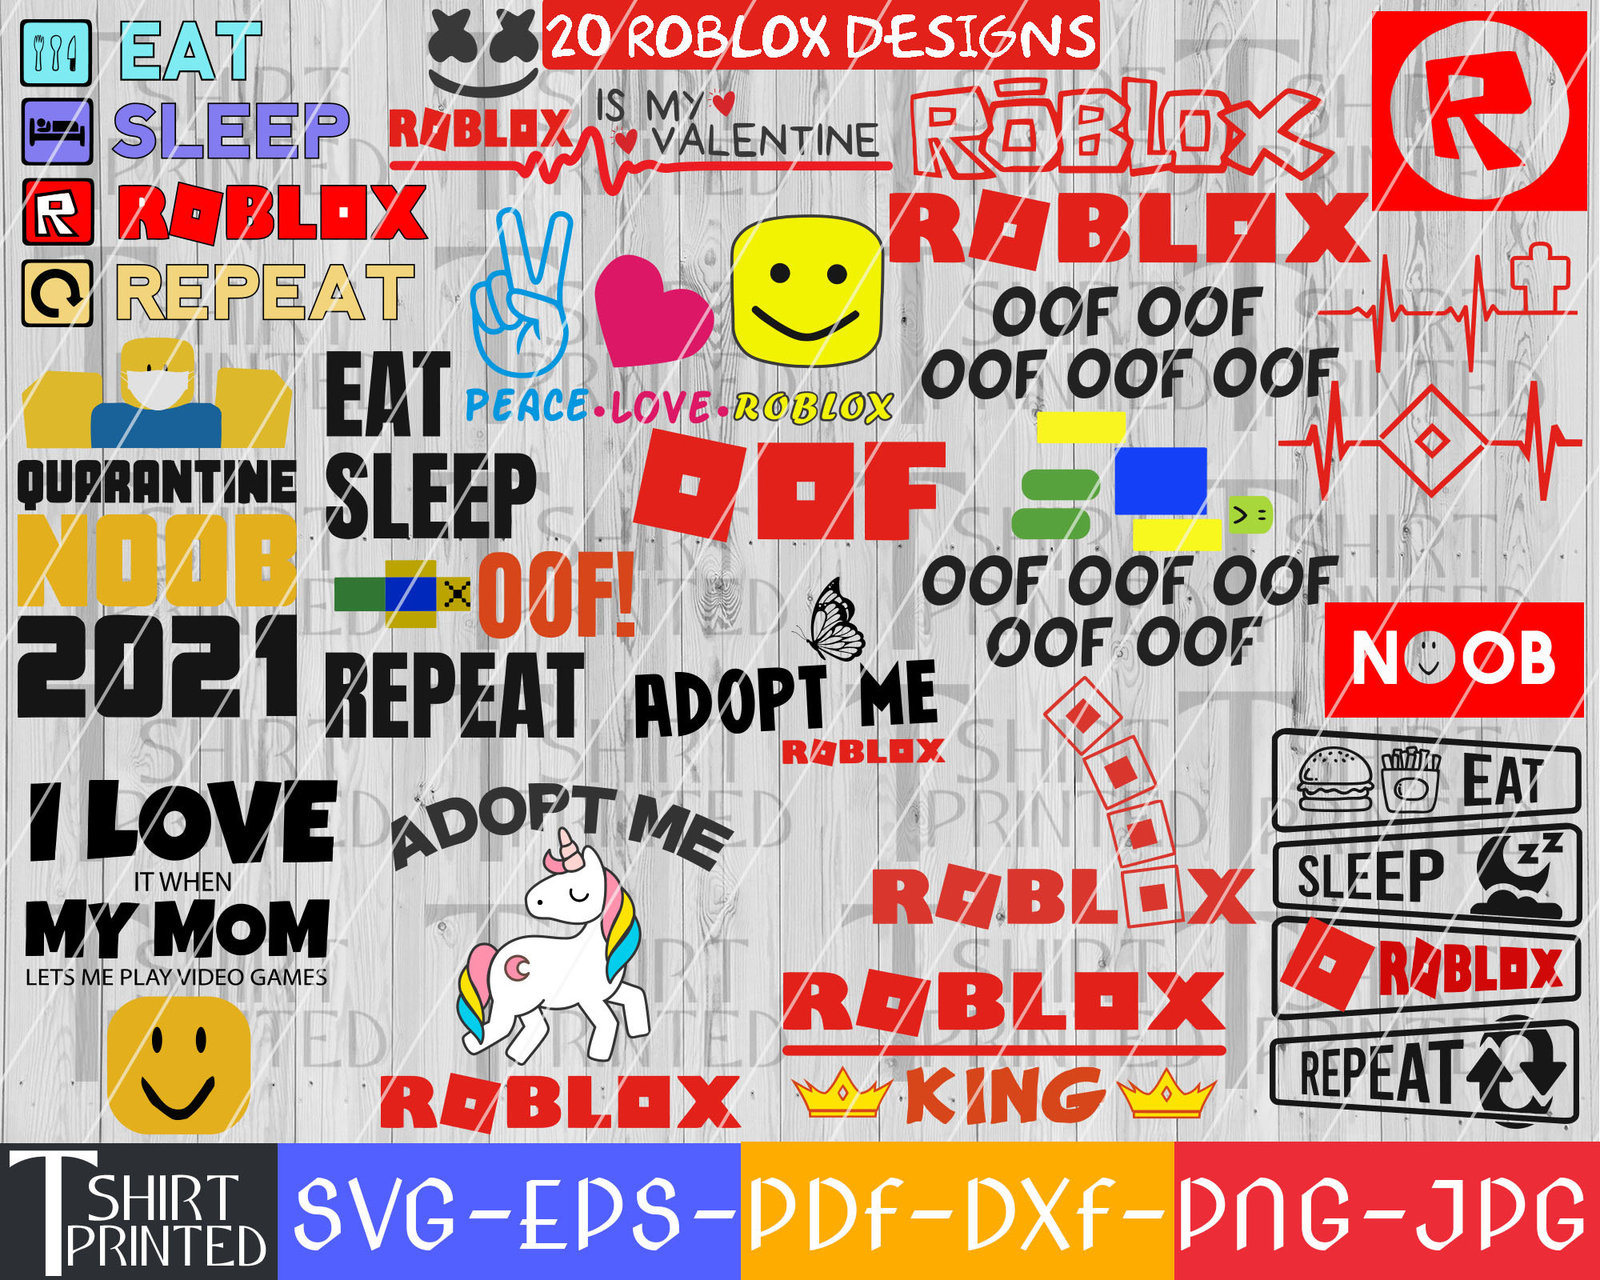 Roblox Svg Bundle, Roblox Game Svg, Roblox Character, Eat Sleep Roblox Repeat.